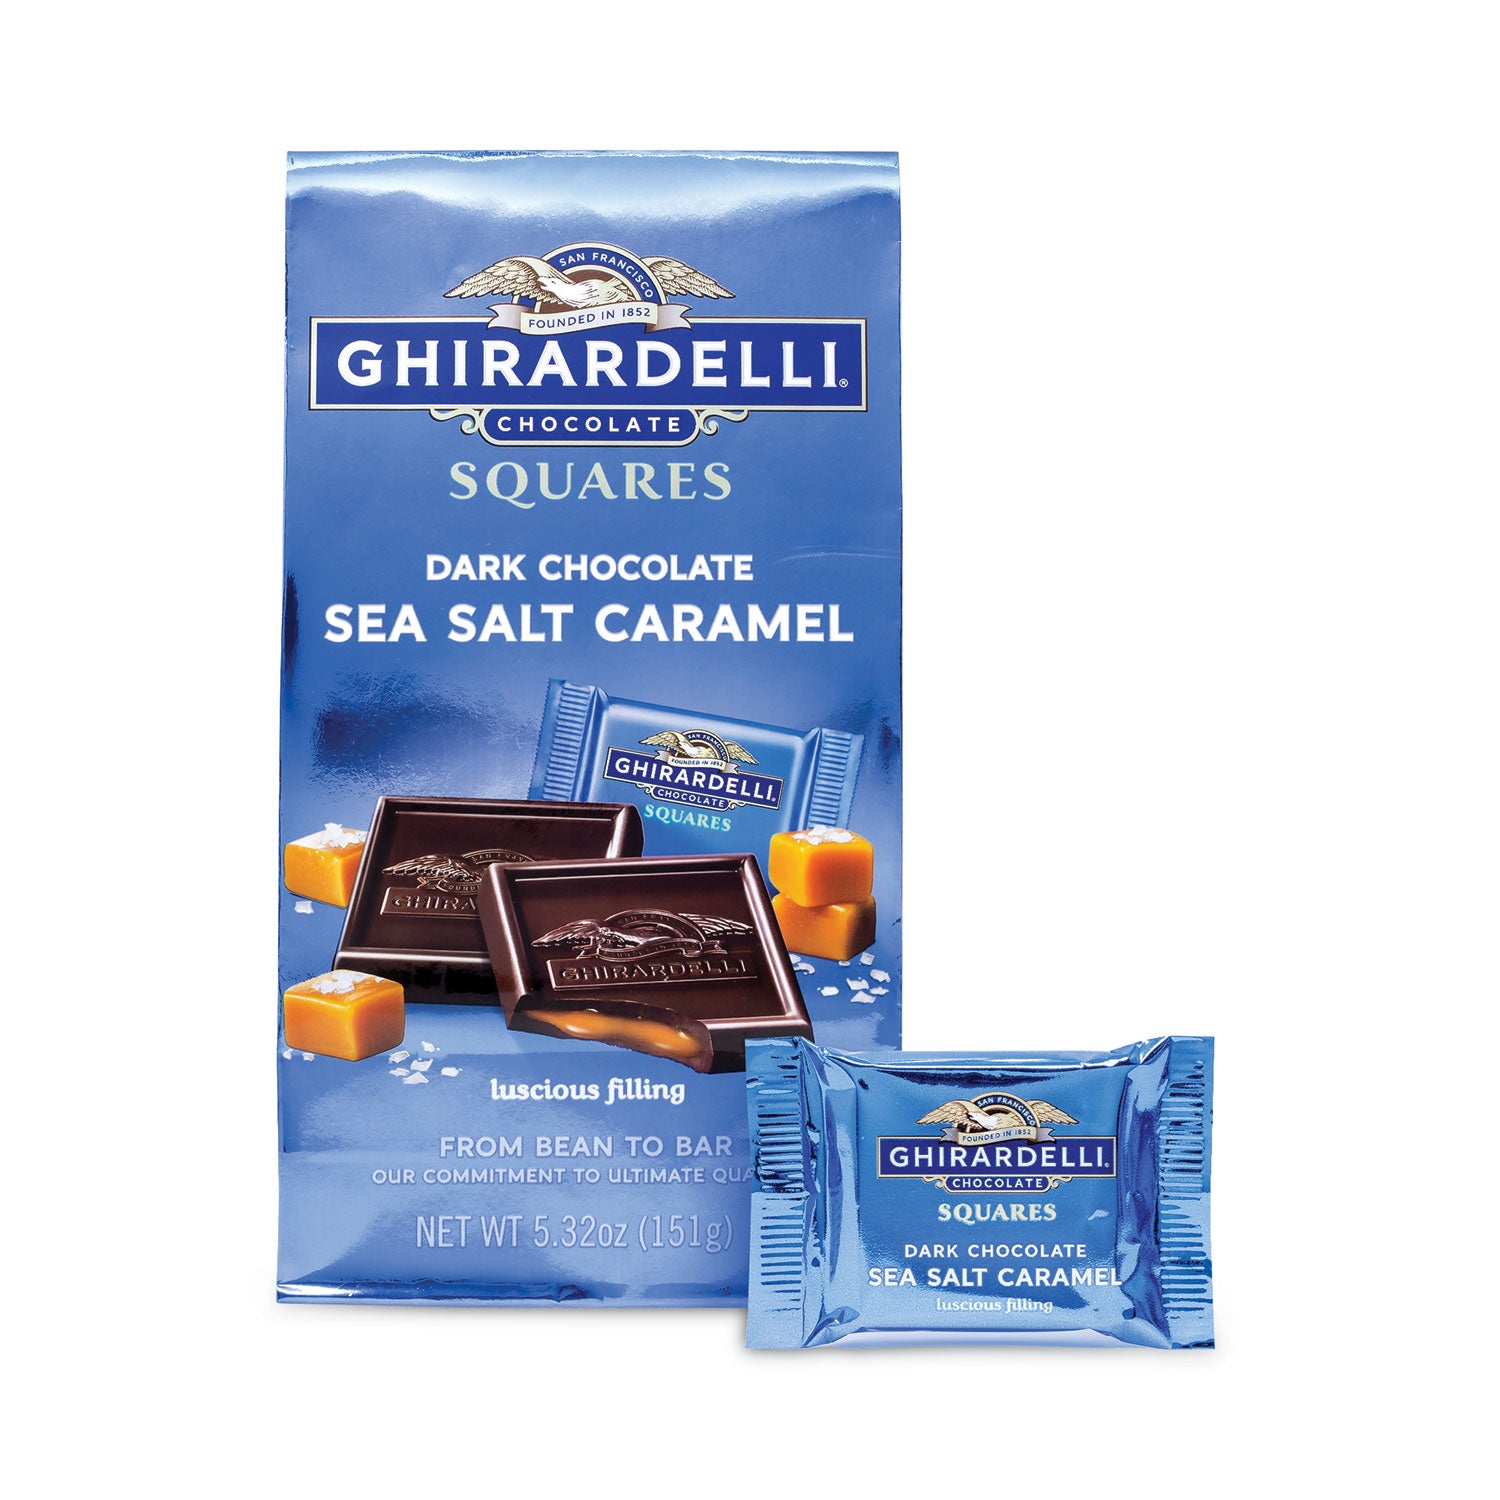 dark-and-sea-salt-caramel-chocolate-squares-532-oz-packs-3-count-ships-in-1-3-business-days_grr30001023 - 1